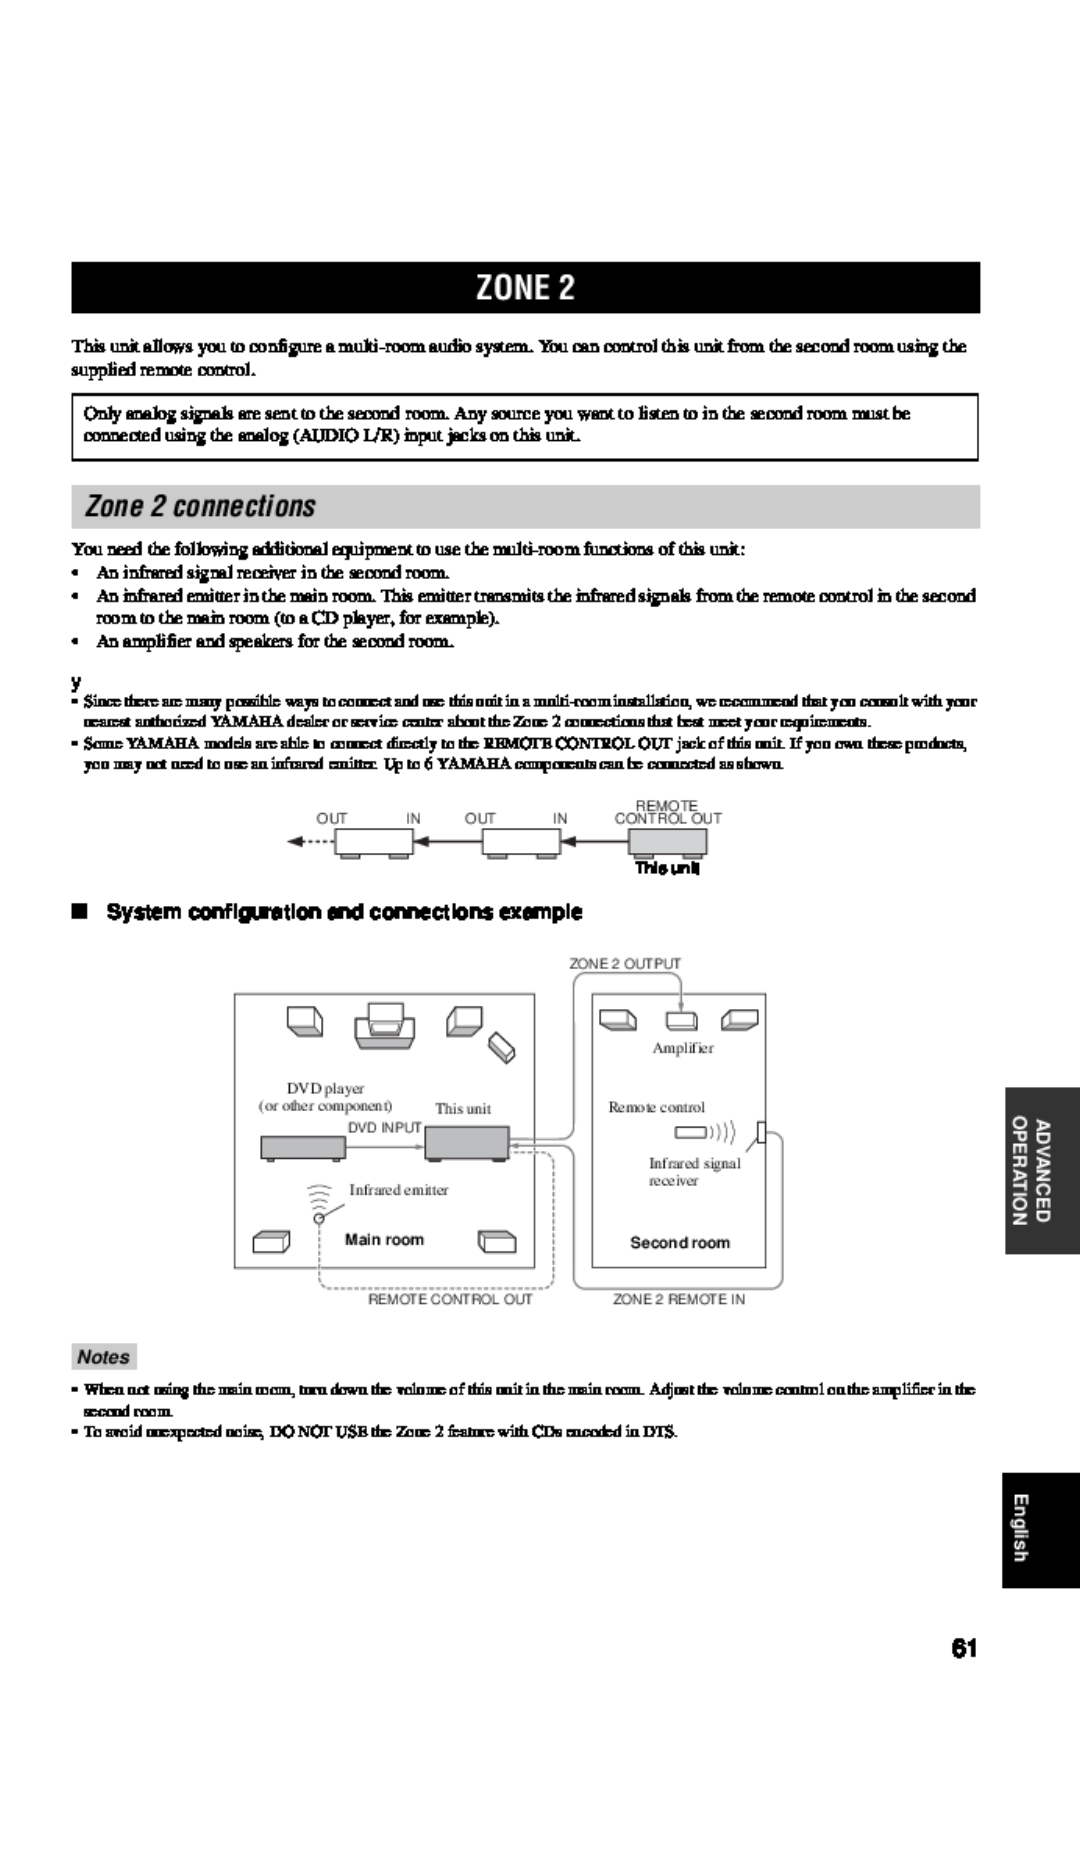 Yamaha RX-V557 owner manual Zone 2 connections, System configuration and connections example 